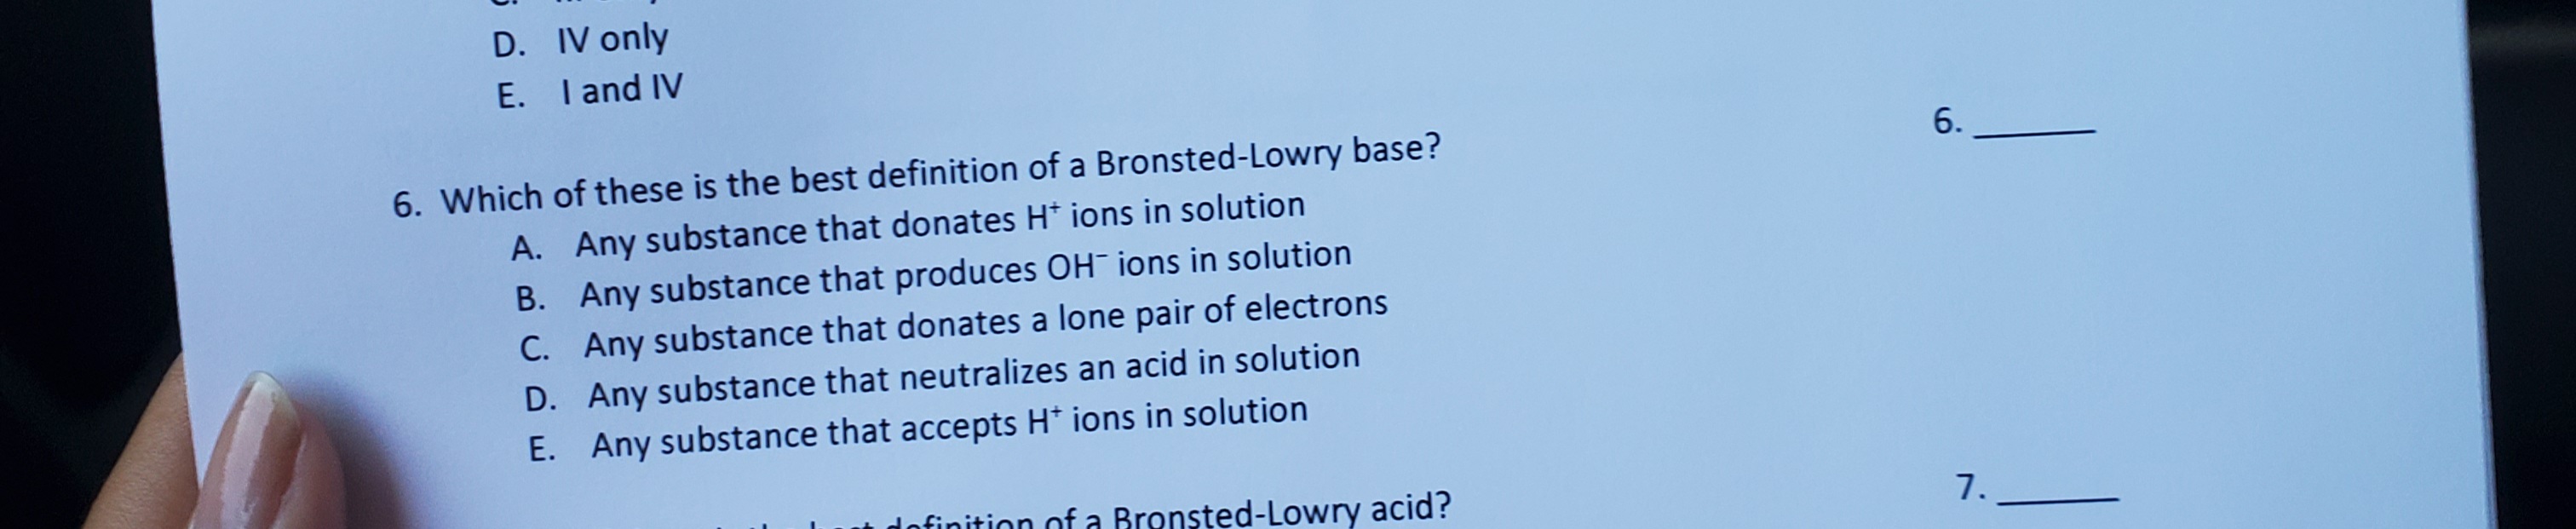 D. IV only
E. I and IV
6. Which of these is the best definition of a Bronsted-Lowry base?
A. Any substance that donates H* ions in solution
B. Any substance that produces OH¯ ions in solution
C. Any substance that donates a lone pair of electrons
D. Any substance that neutralizes an acid in solution
E. Any substance that accepts H* ions in solution
finition of a Bronsted-Lowry acid?
7.
6.
